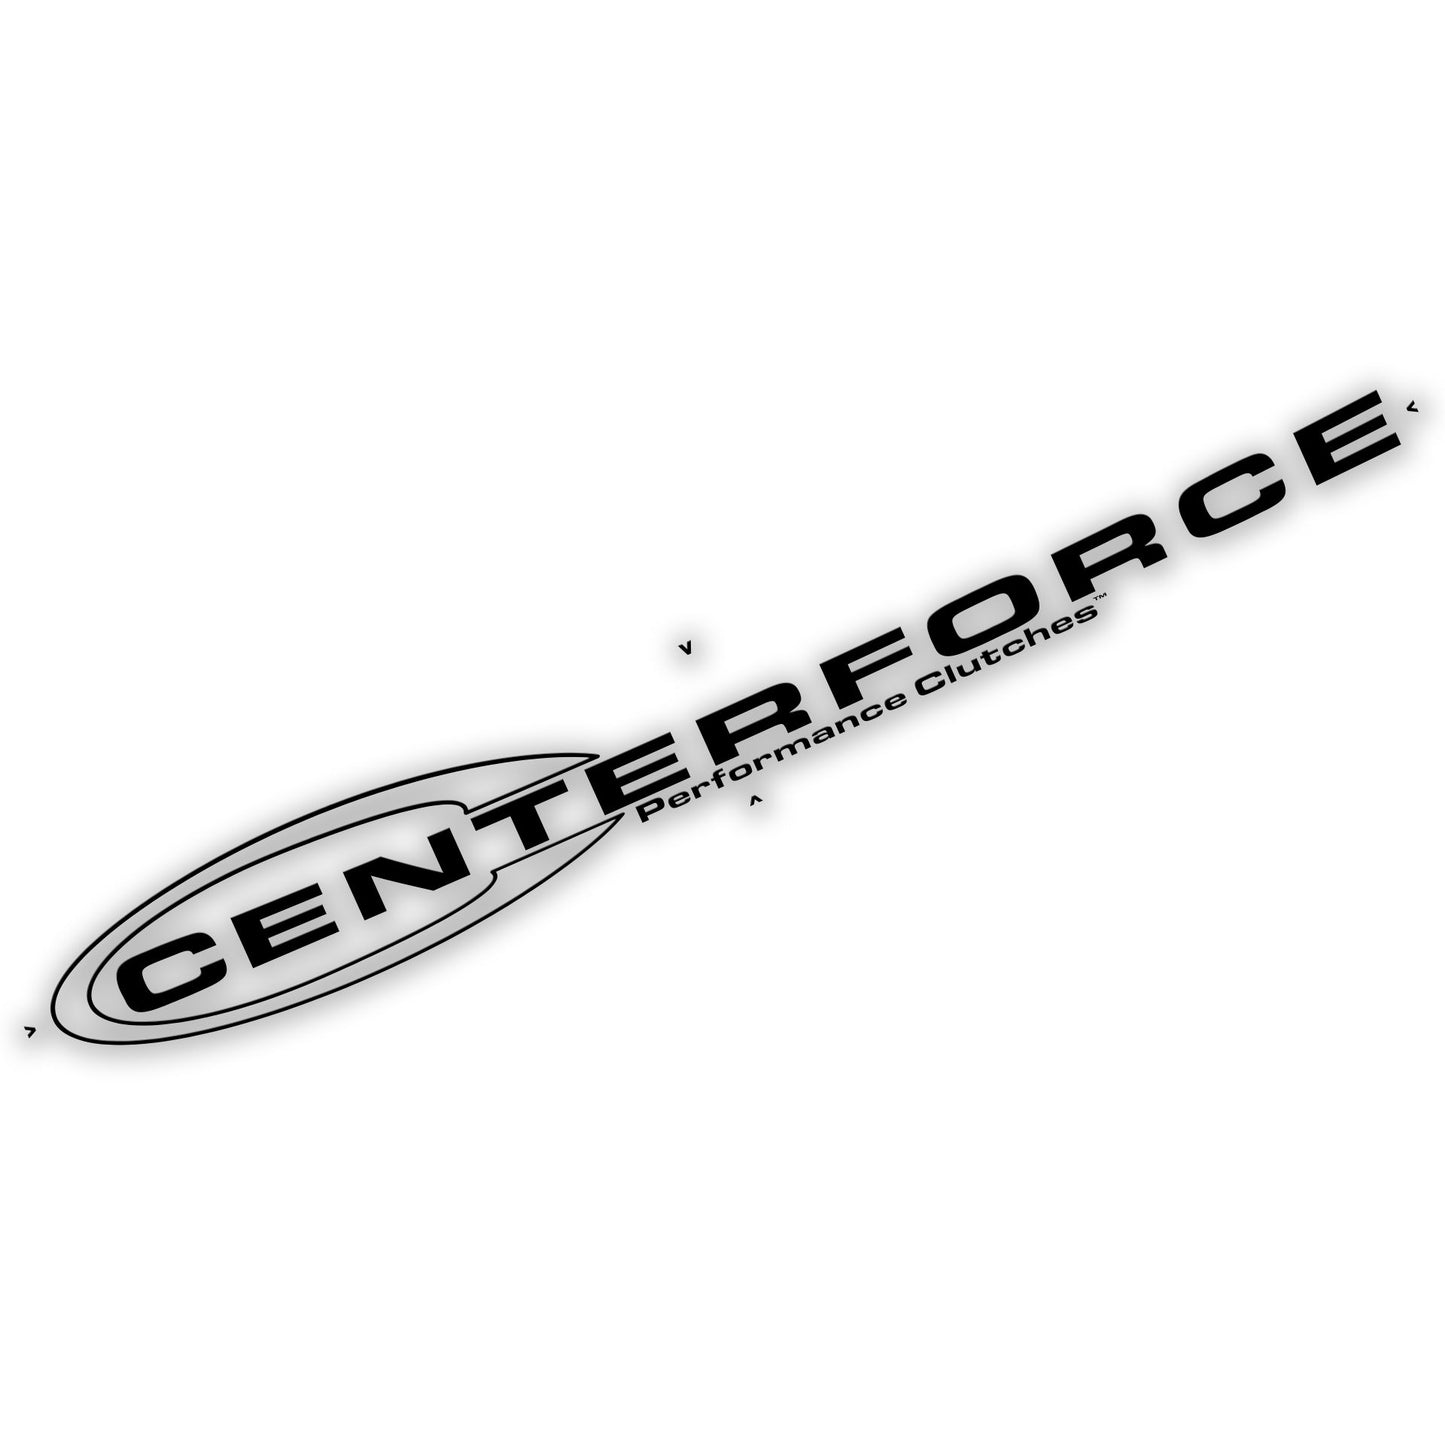 PN: PR081686B - Centerforce Guides and Gear Exterior Decal